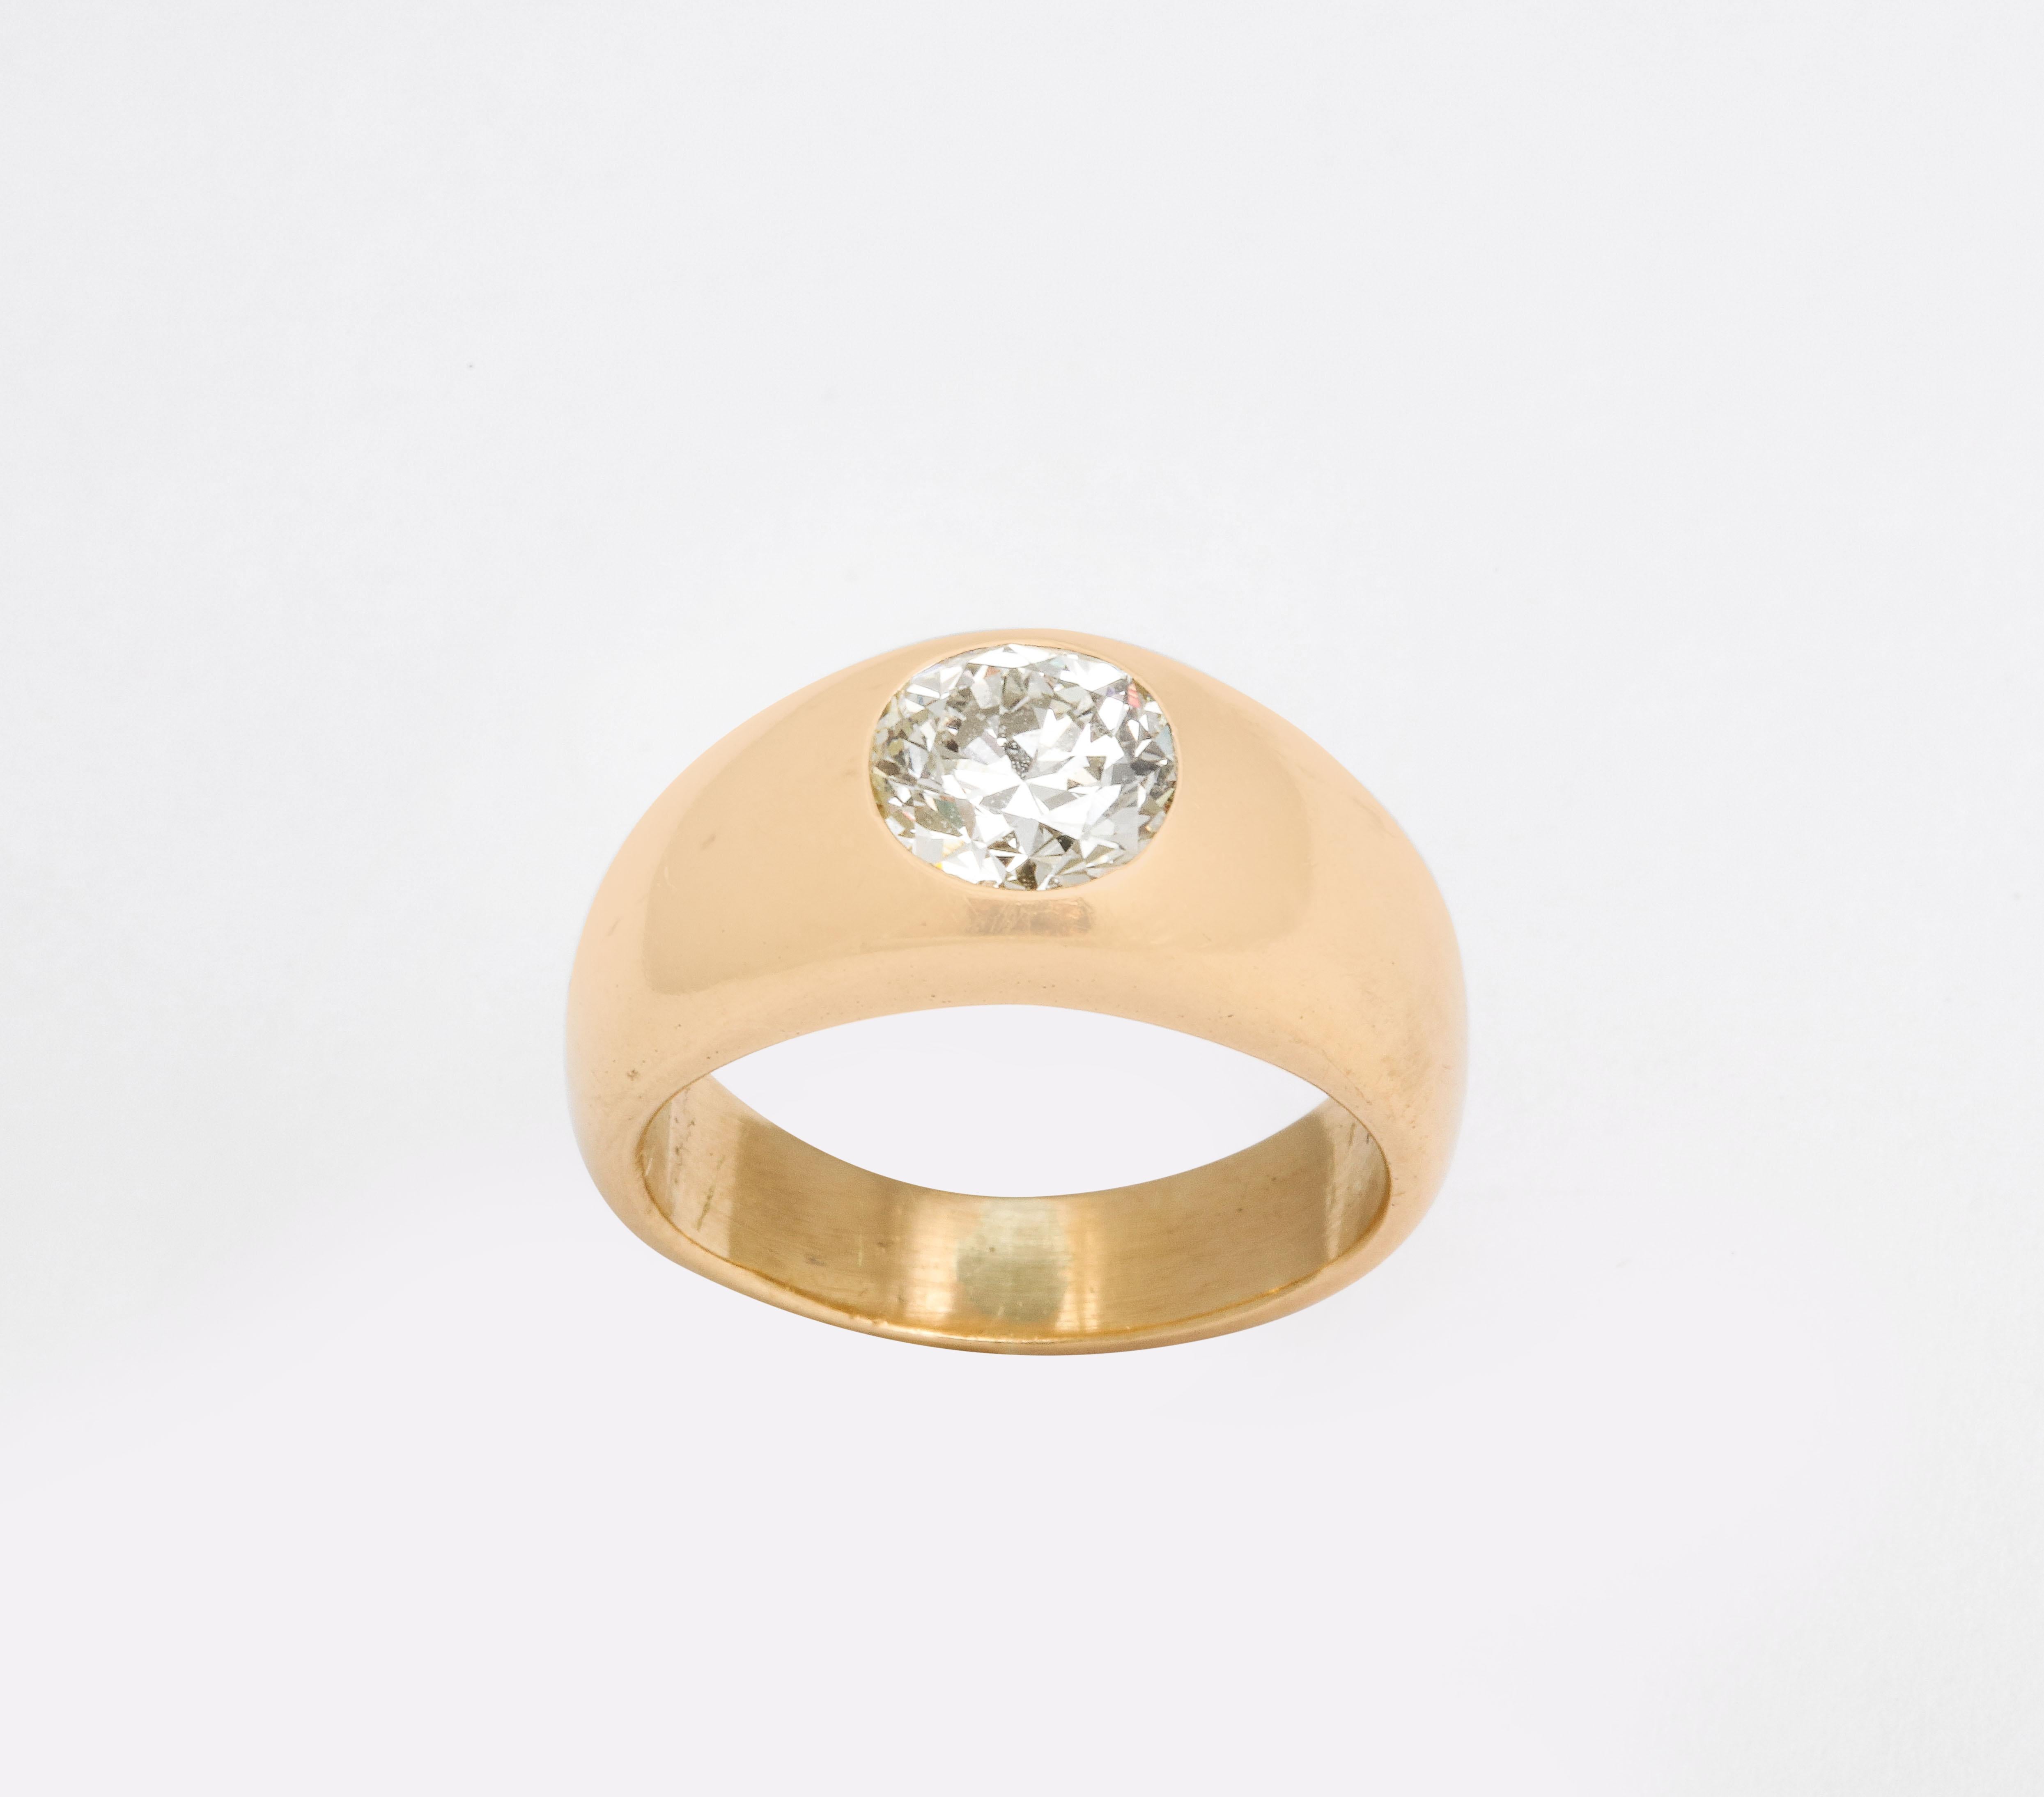 A great 18 k Gold gypsy ring with deepest mine diamond approximately one carat. This is both classic and fashionable.
It is a great look on its own but is also stackable.